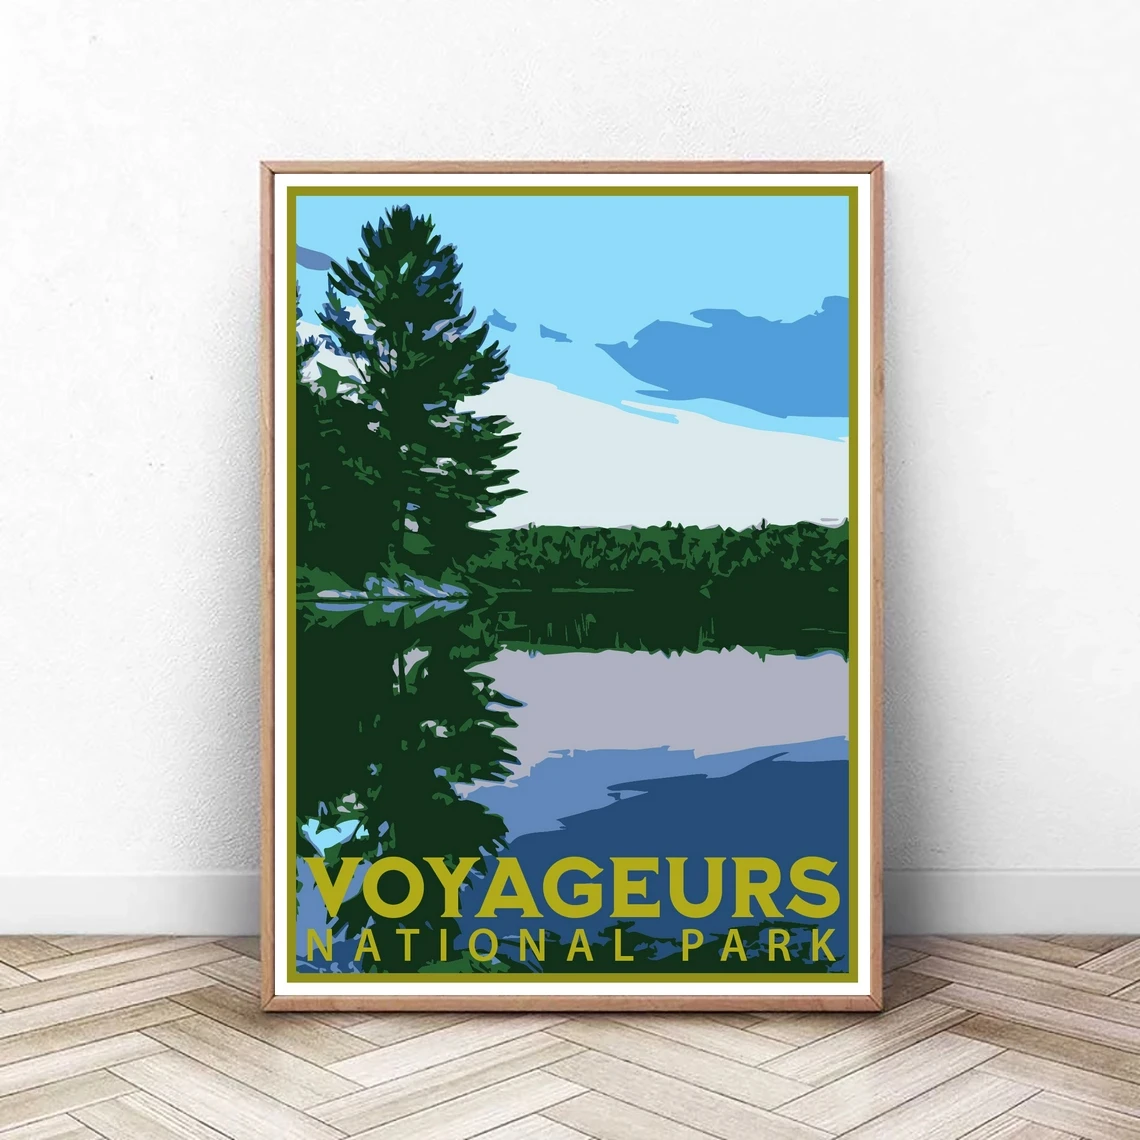 

Voyageurs National Park Travel Poster, Vintage Serigraph Style Poster, Wall Art, Travel, Vacation, Souvenir, Frame Not Included